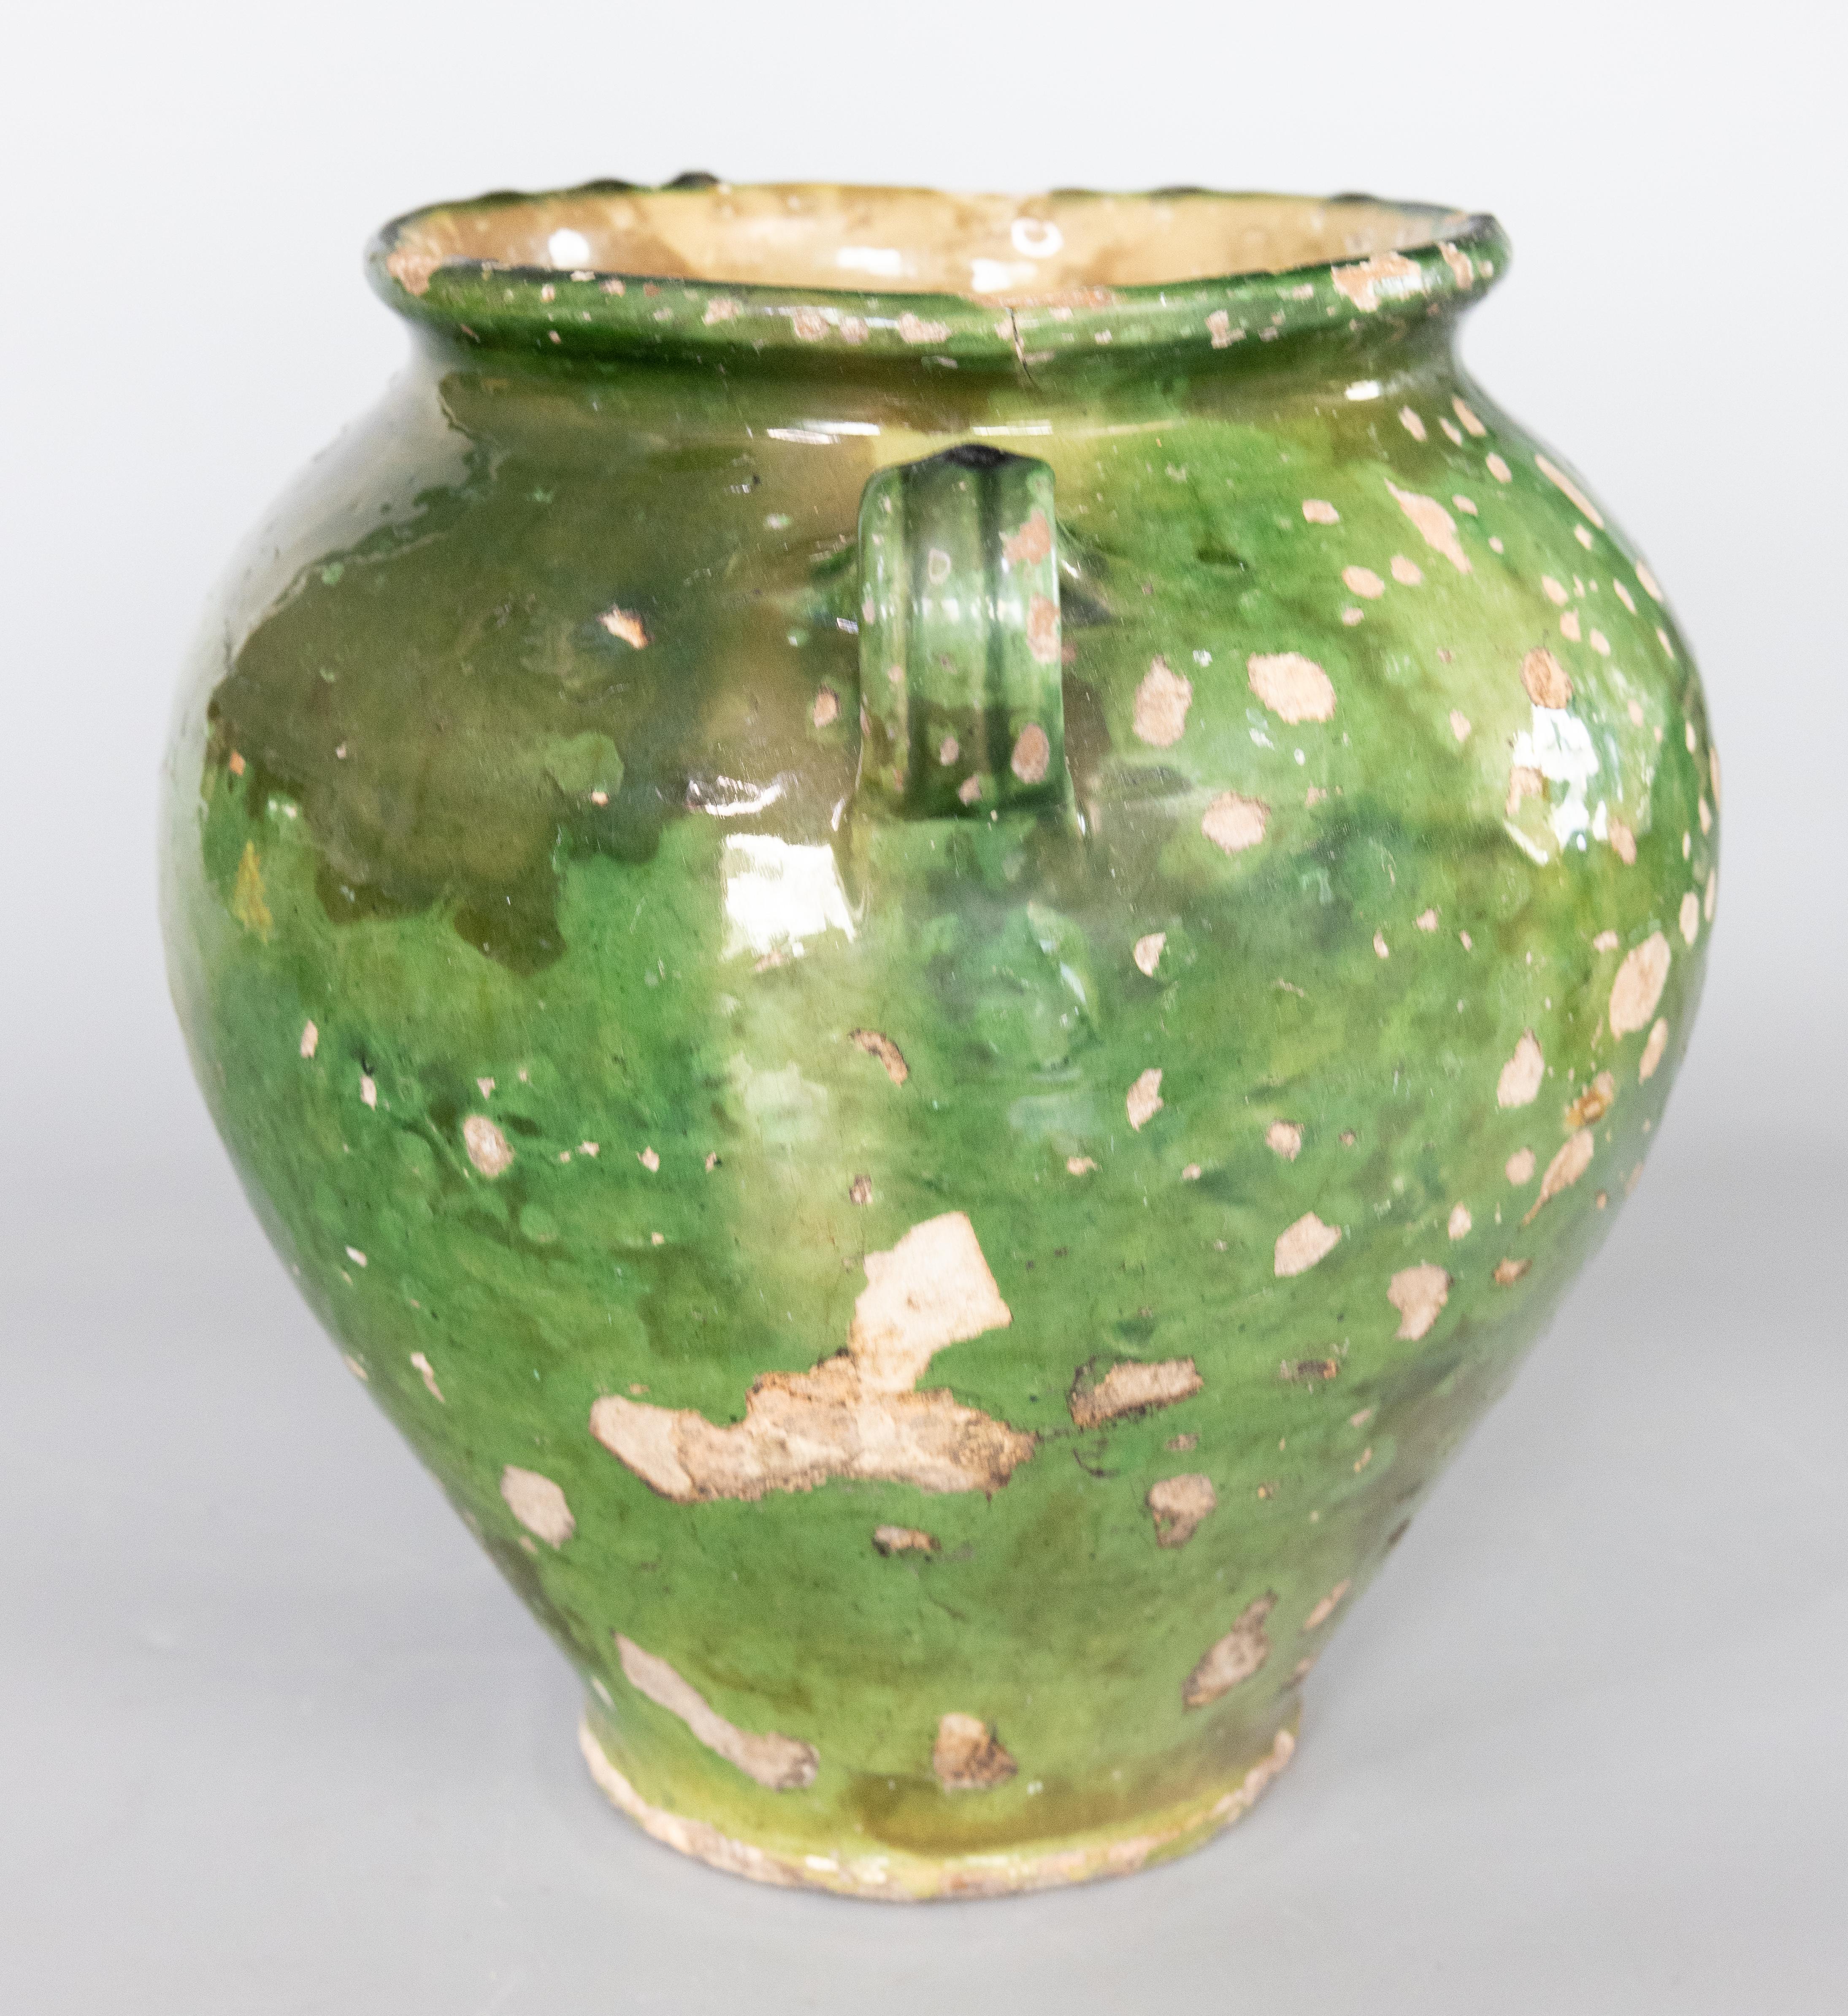 Antique 19th century French confit pot with green glaze from the South of France, Castelnaudary. This pot or planter is hand thrown with charming handles known as 'ears'. These jars were used for storing and preserving cooked meat. It displays